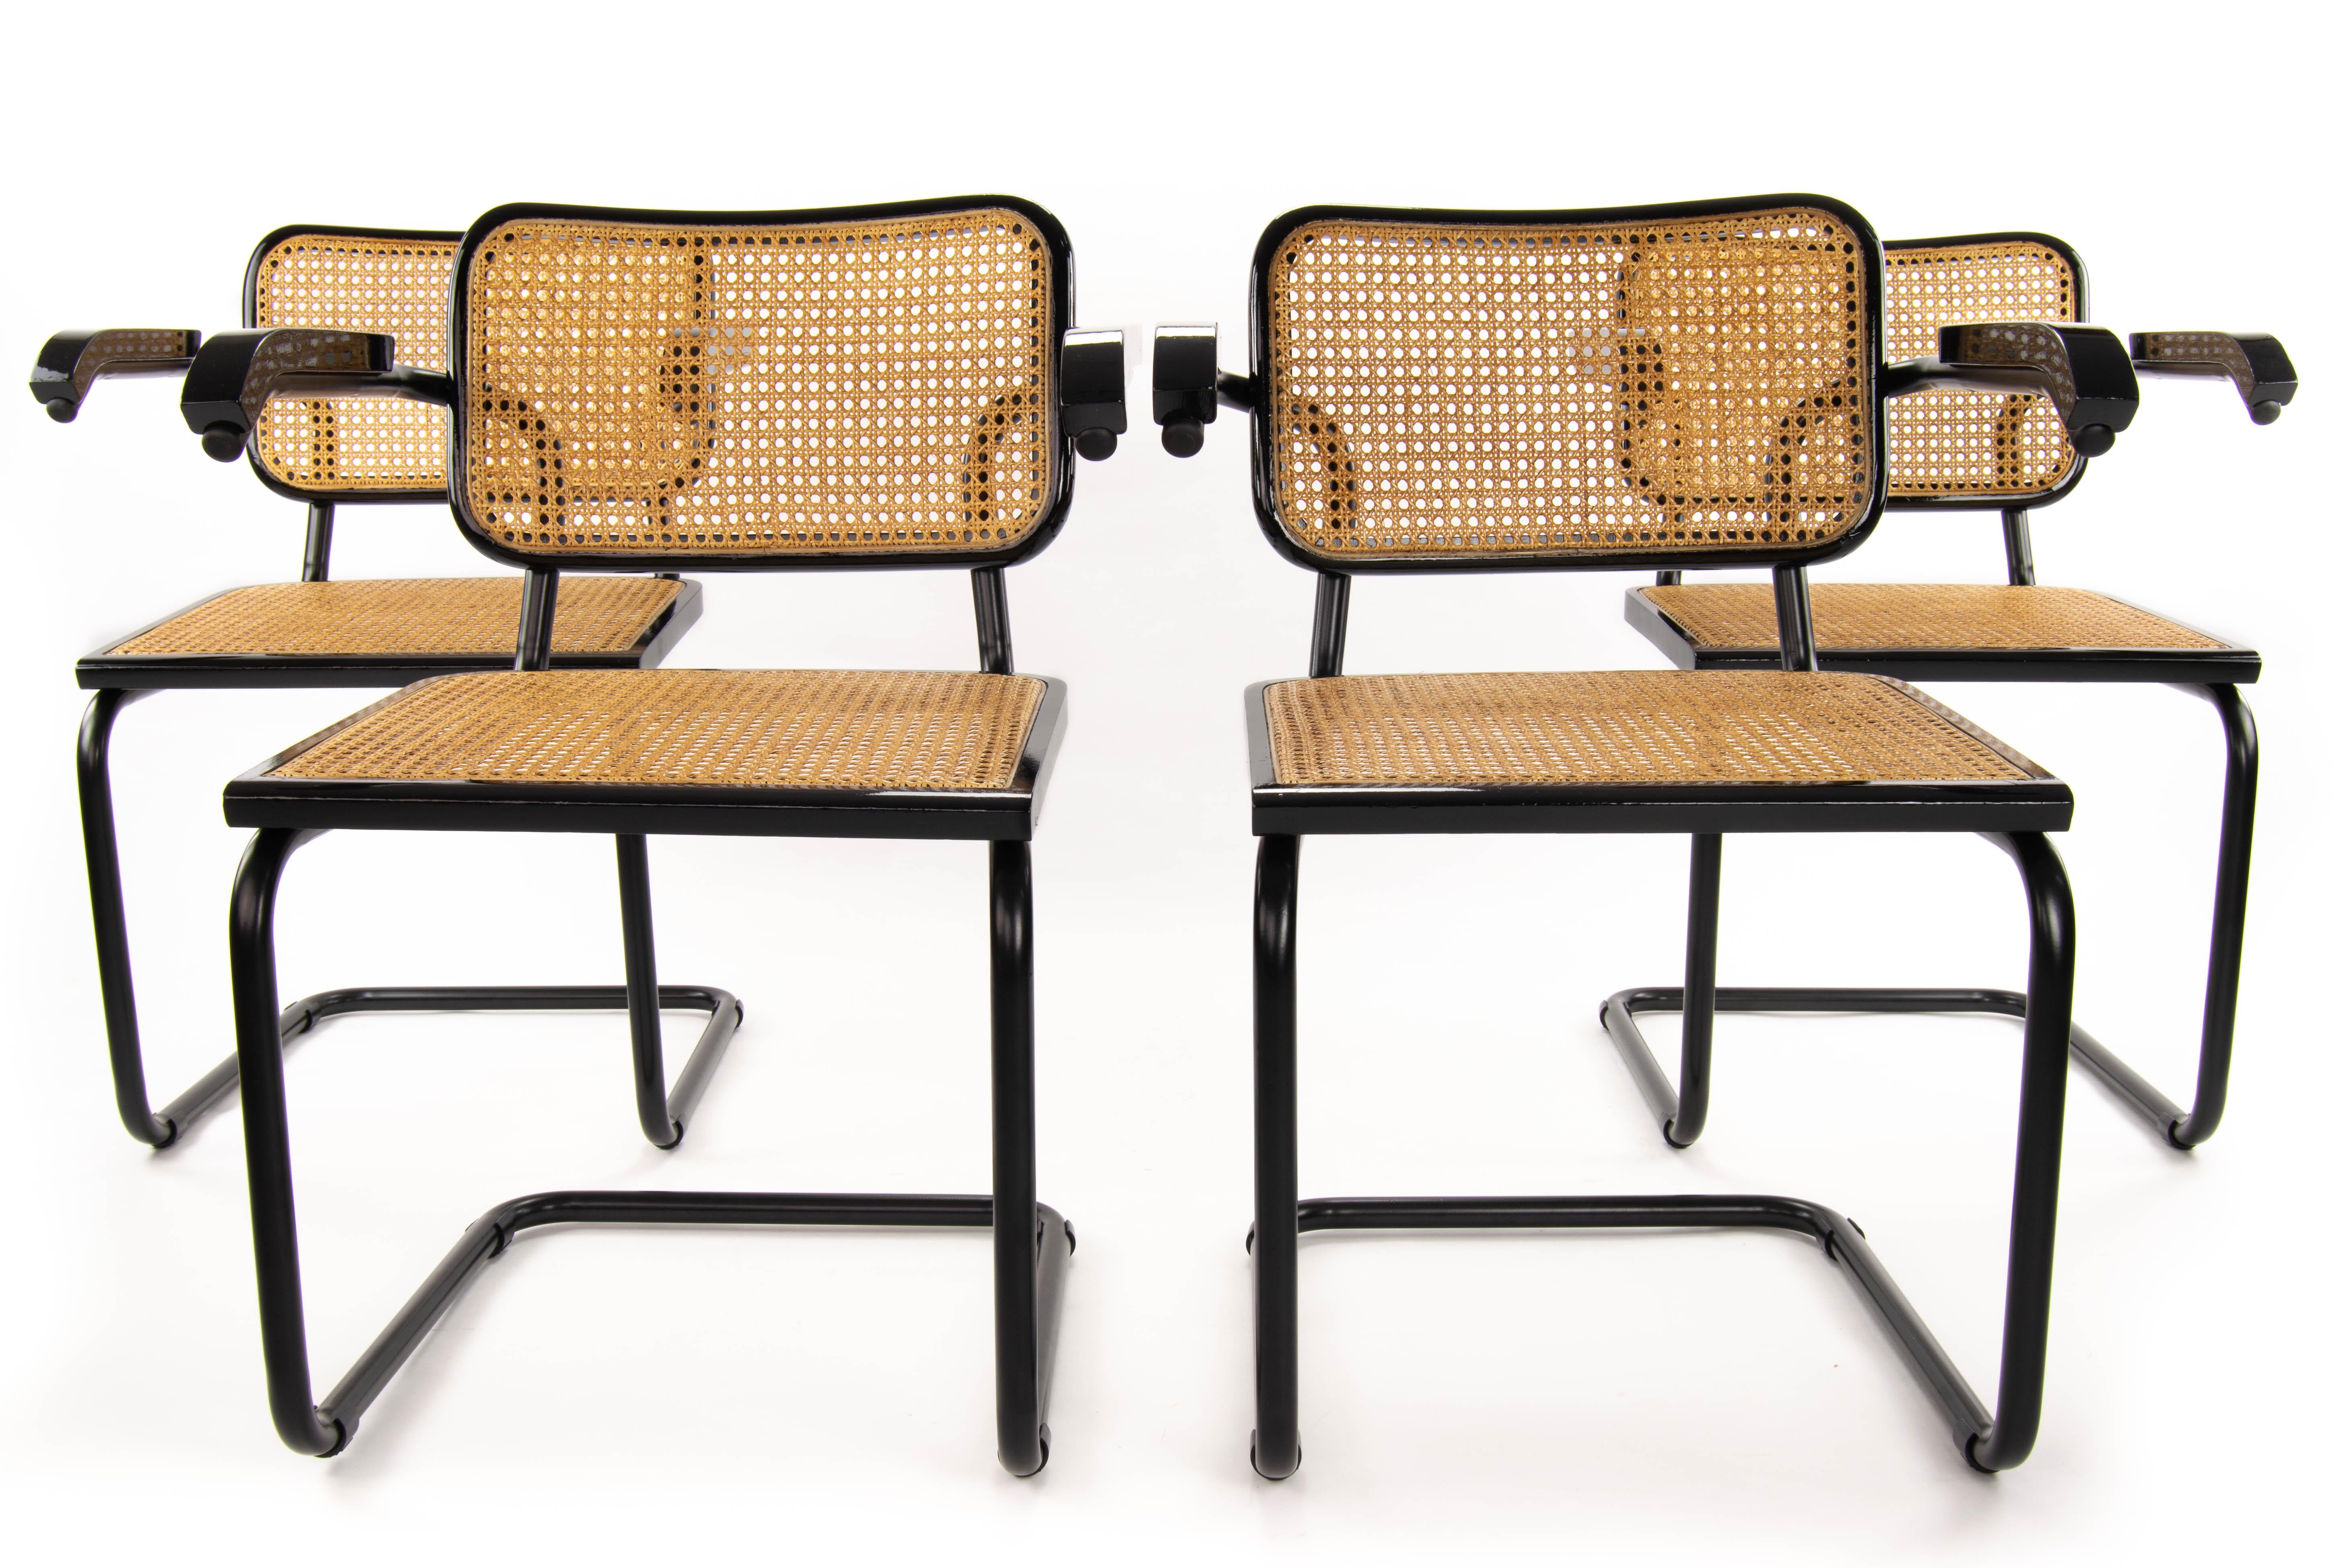 Set of four Cesca chairs, model B64. Tubular structure in black lacquered steel in excellent condition. Beech wood frames lacquered in black and Viennese natural grid. Grids of the four seats and backs have been put new.
Measures:
Total height